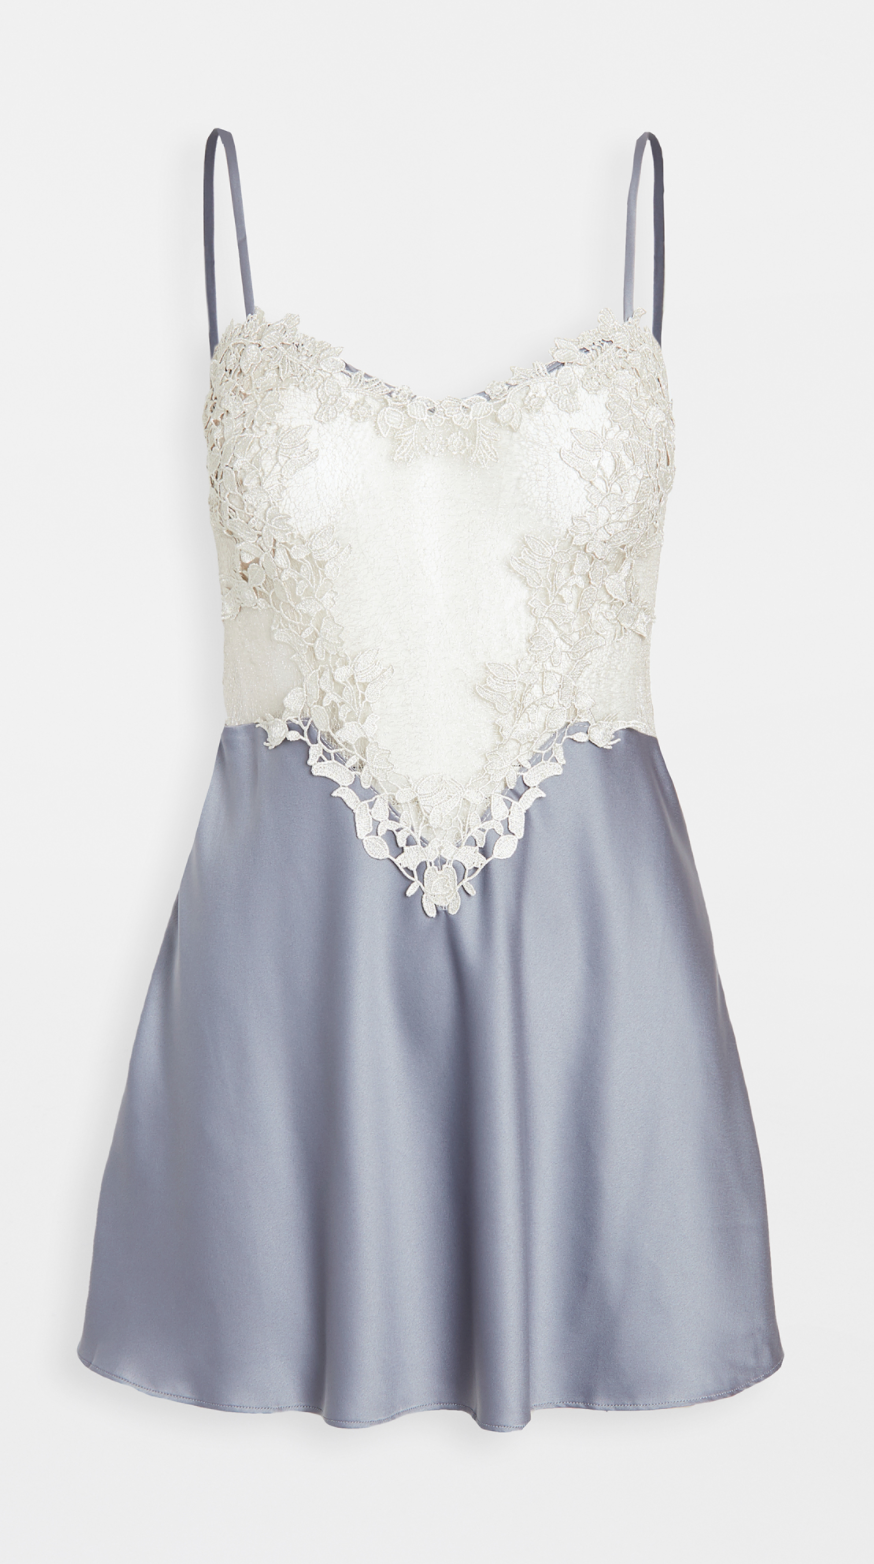 Flora Nikrooz &#39;Showstopper&#39; Charmeuse Chemise with Lace (Photo via Shopbop)